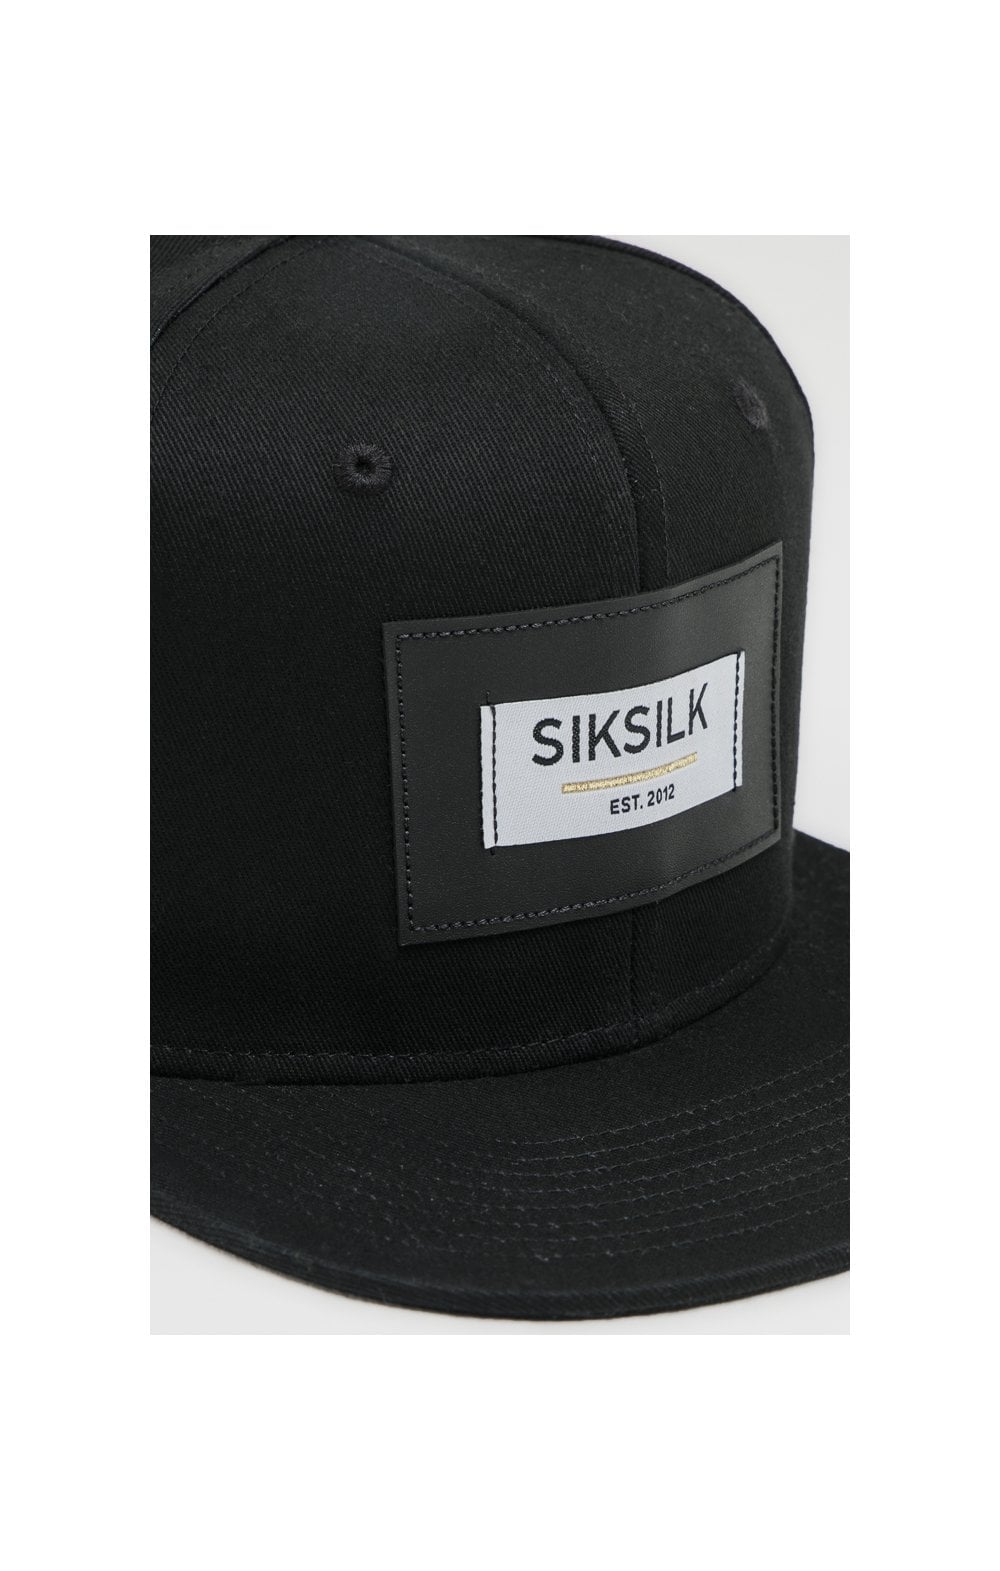 Load image into Gallery viewer, SikSilk PU Patch Snapback - Black (1)